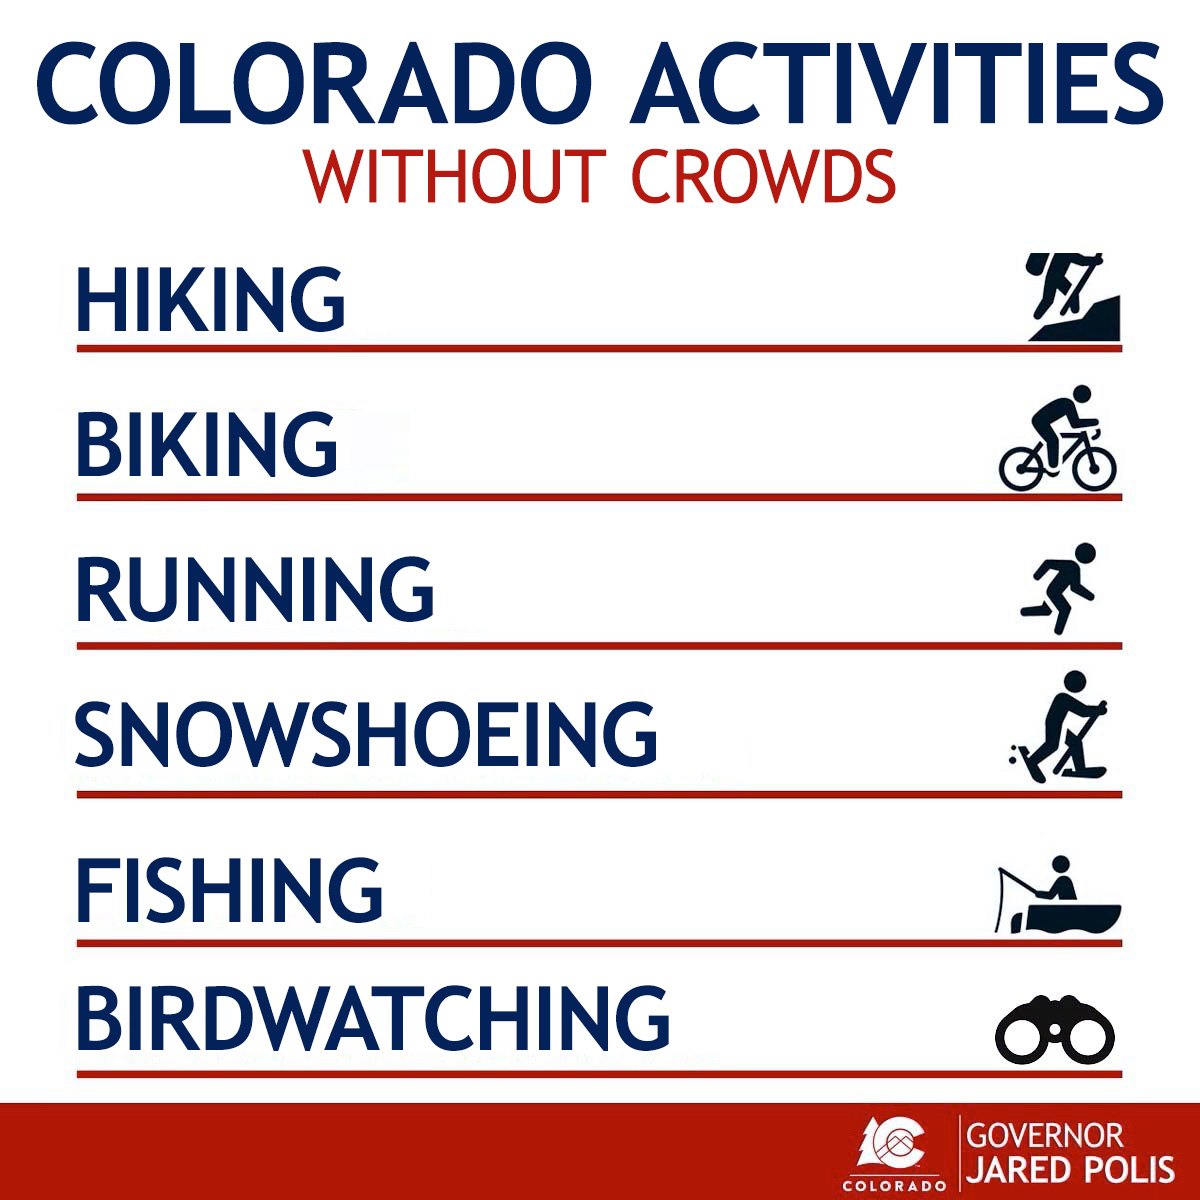 Looking for things to do that don’t involve being around large groups of people? Luckily, we live in the best state in the country with great weather year-round. Here are a few suggestions if you’re looking to get outside, but still keep our communities safe. #DoingMyPartCO